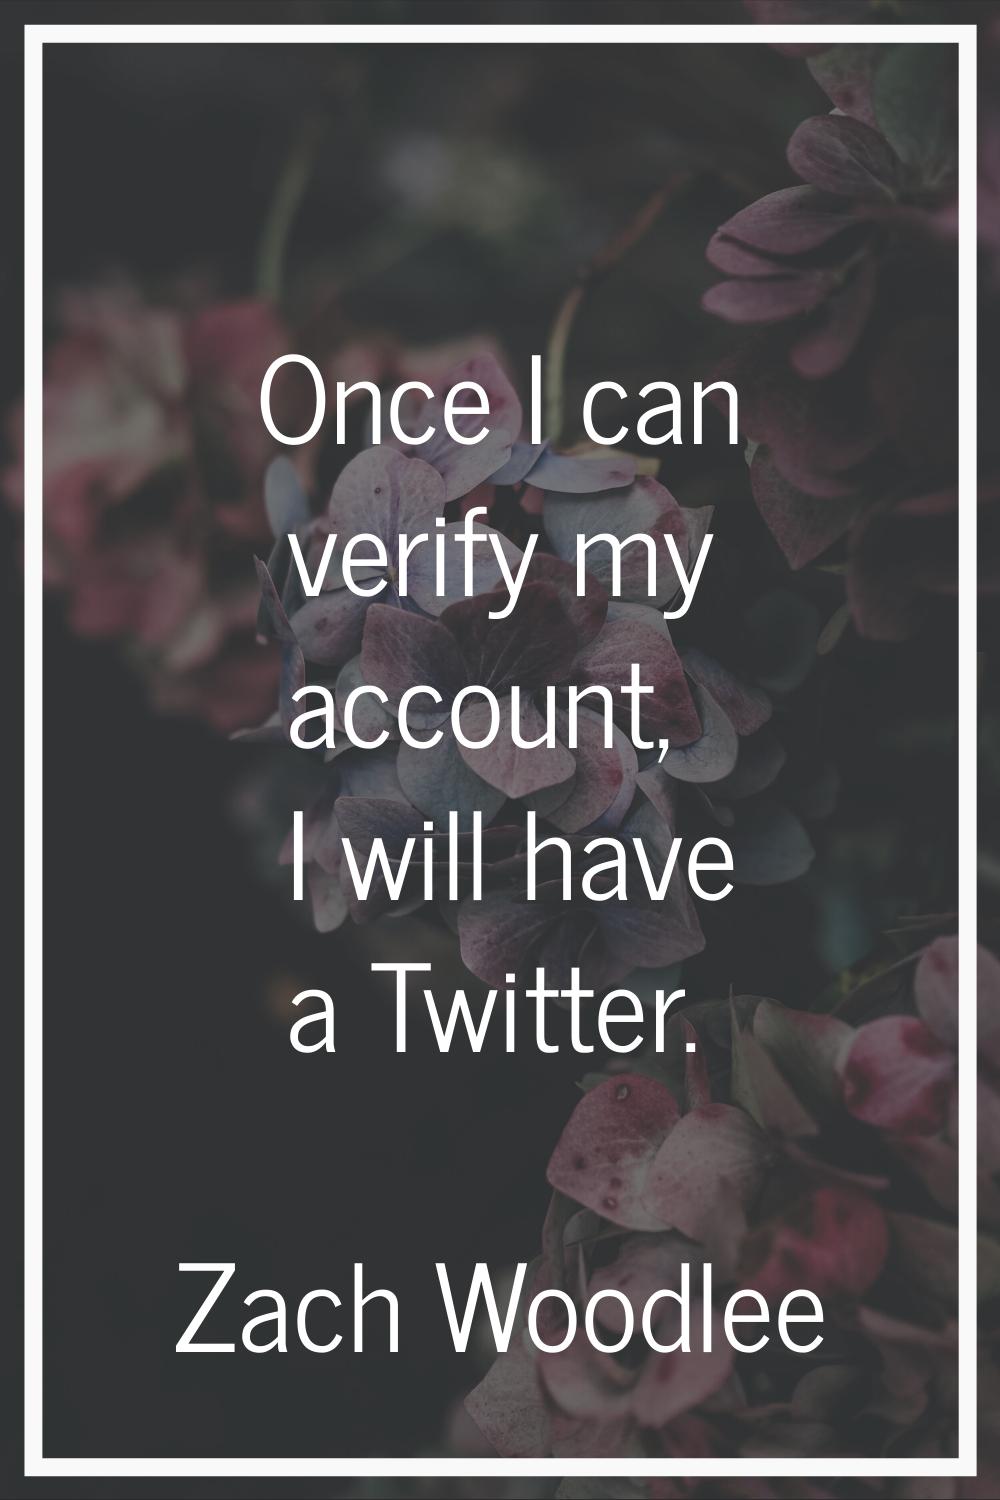 Once I can verify my account, I will have a Twitter.